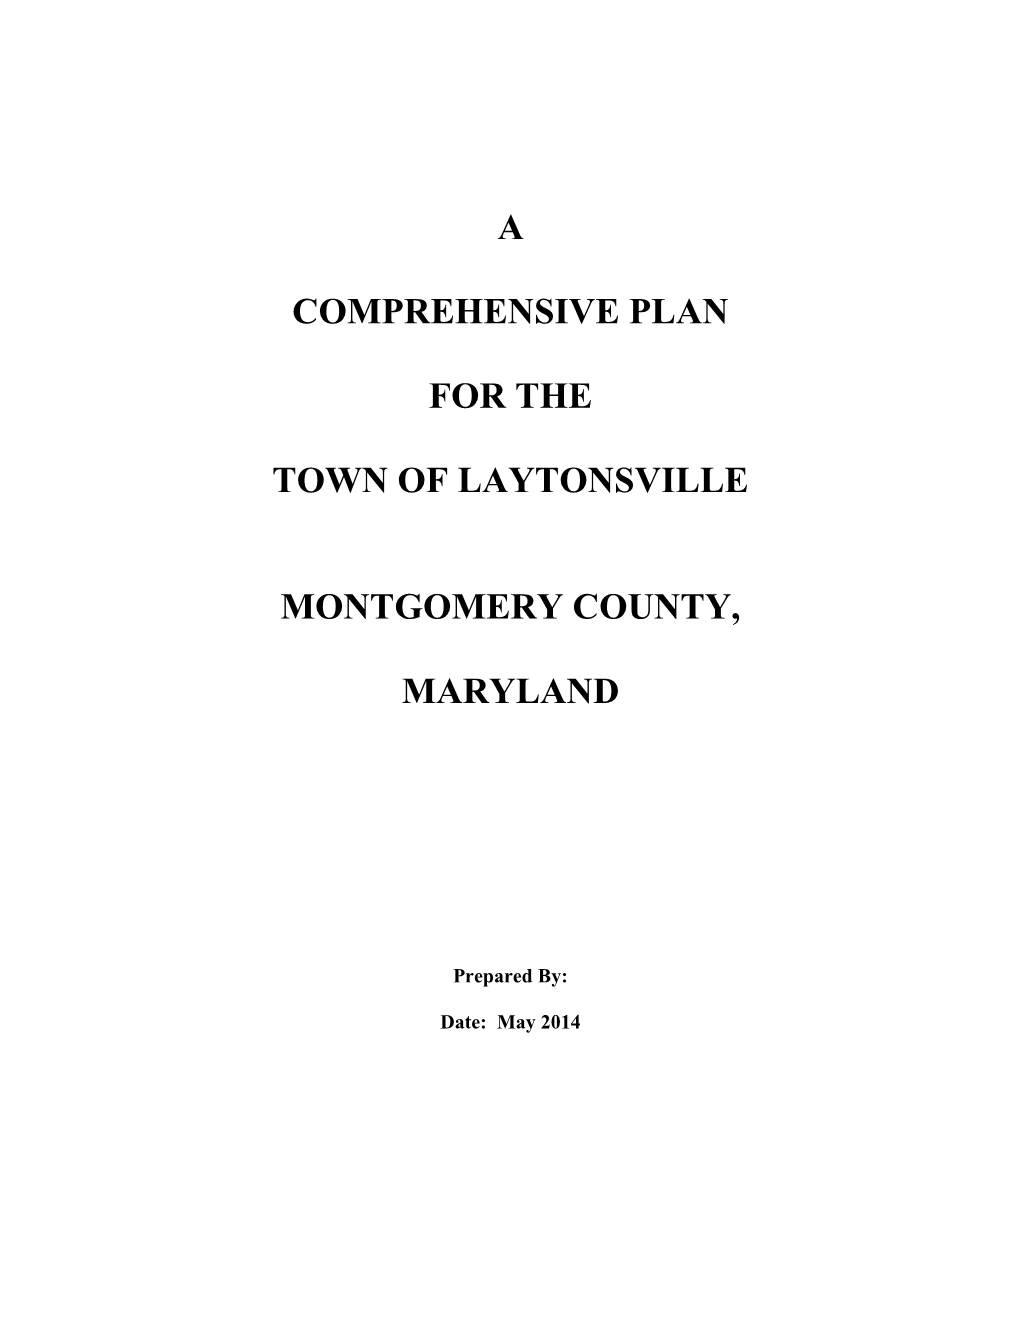 A Comprehensive Plan for the Town of Laytonsville Montgomery County, Maryland